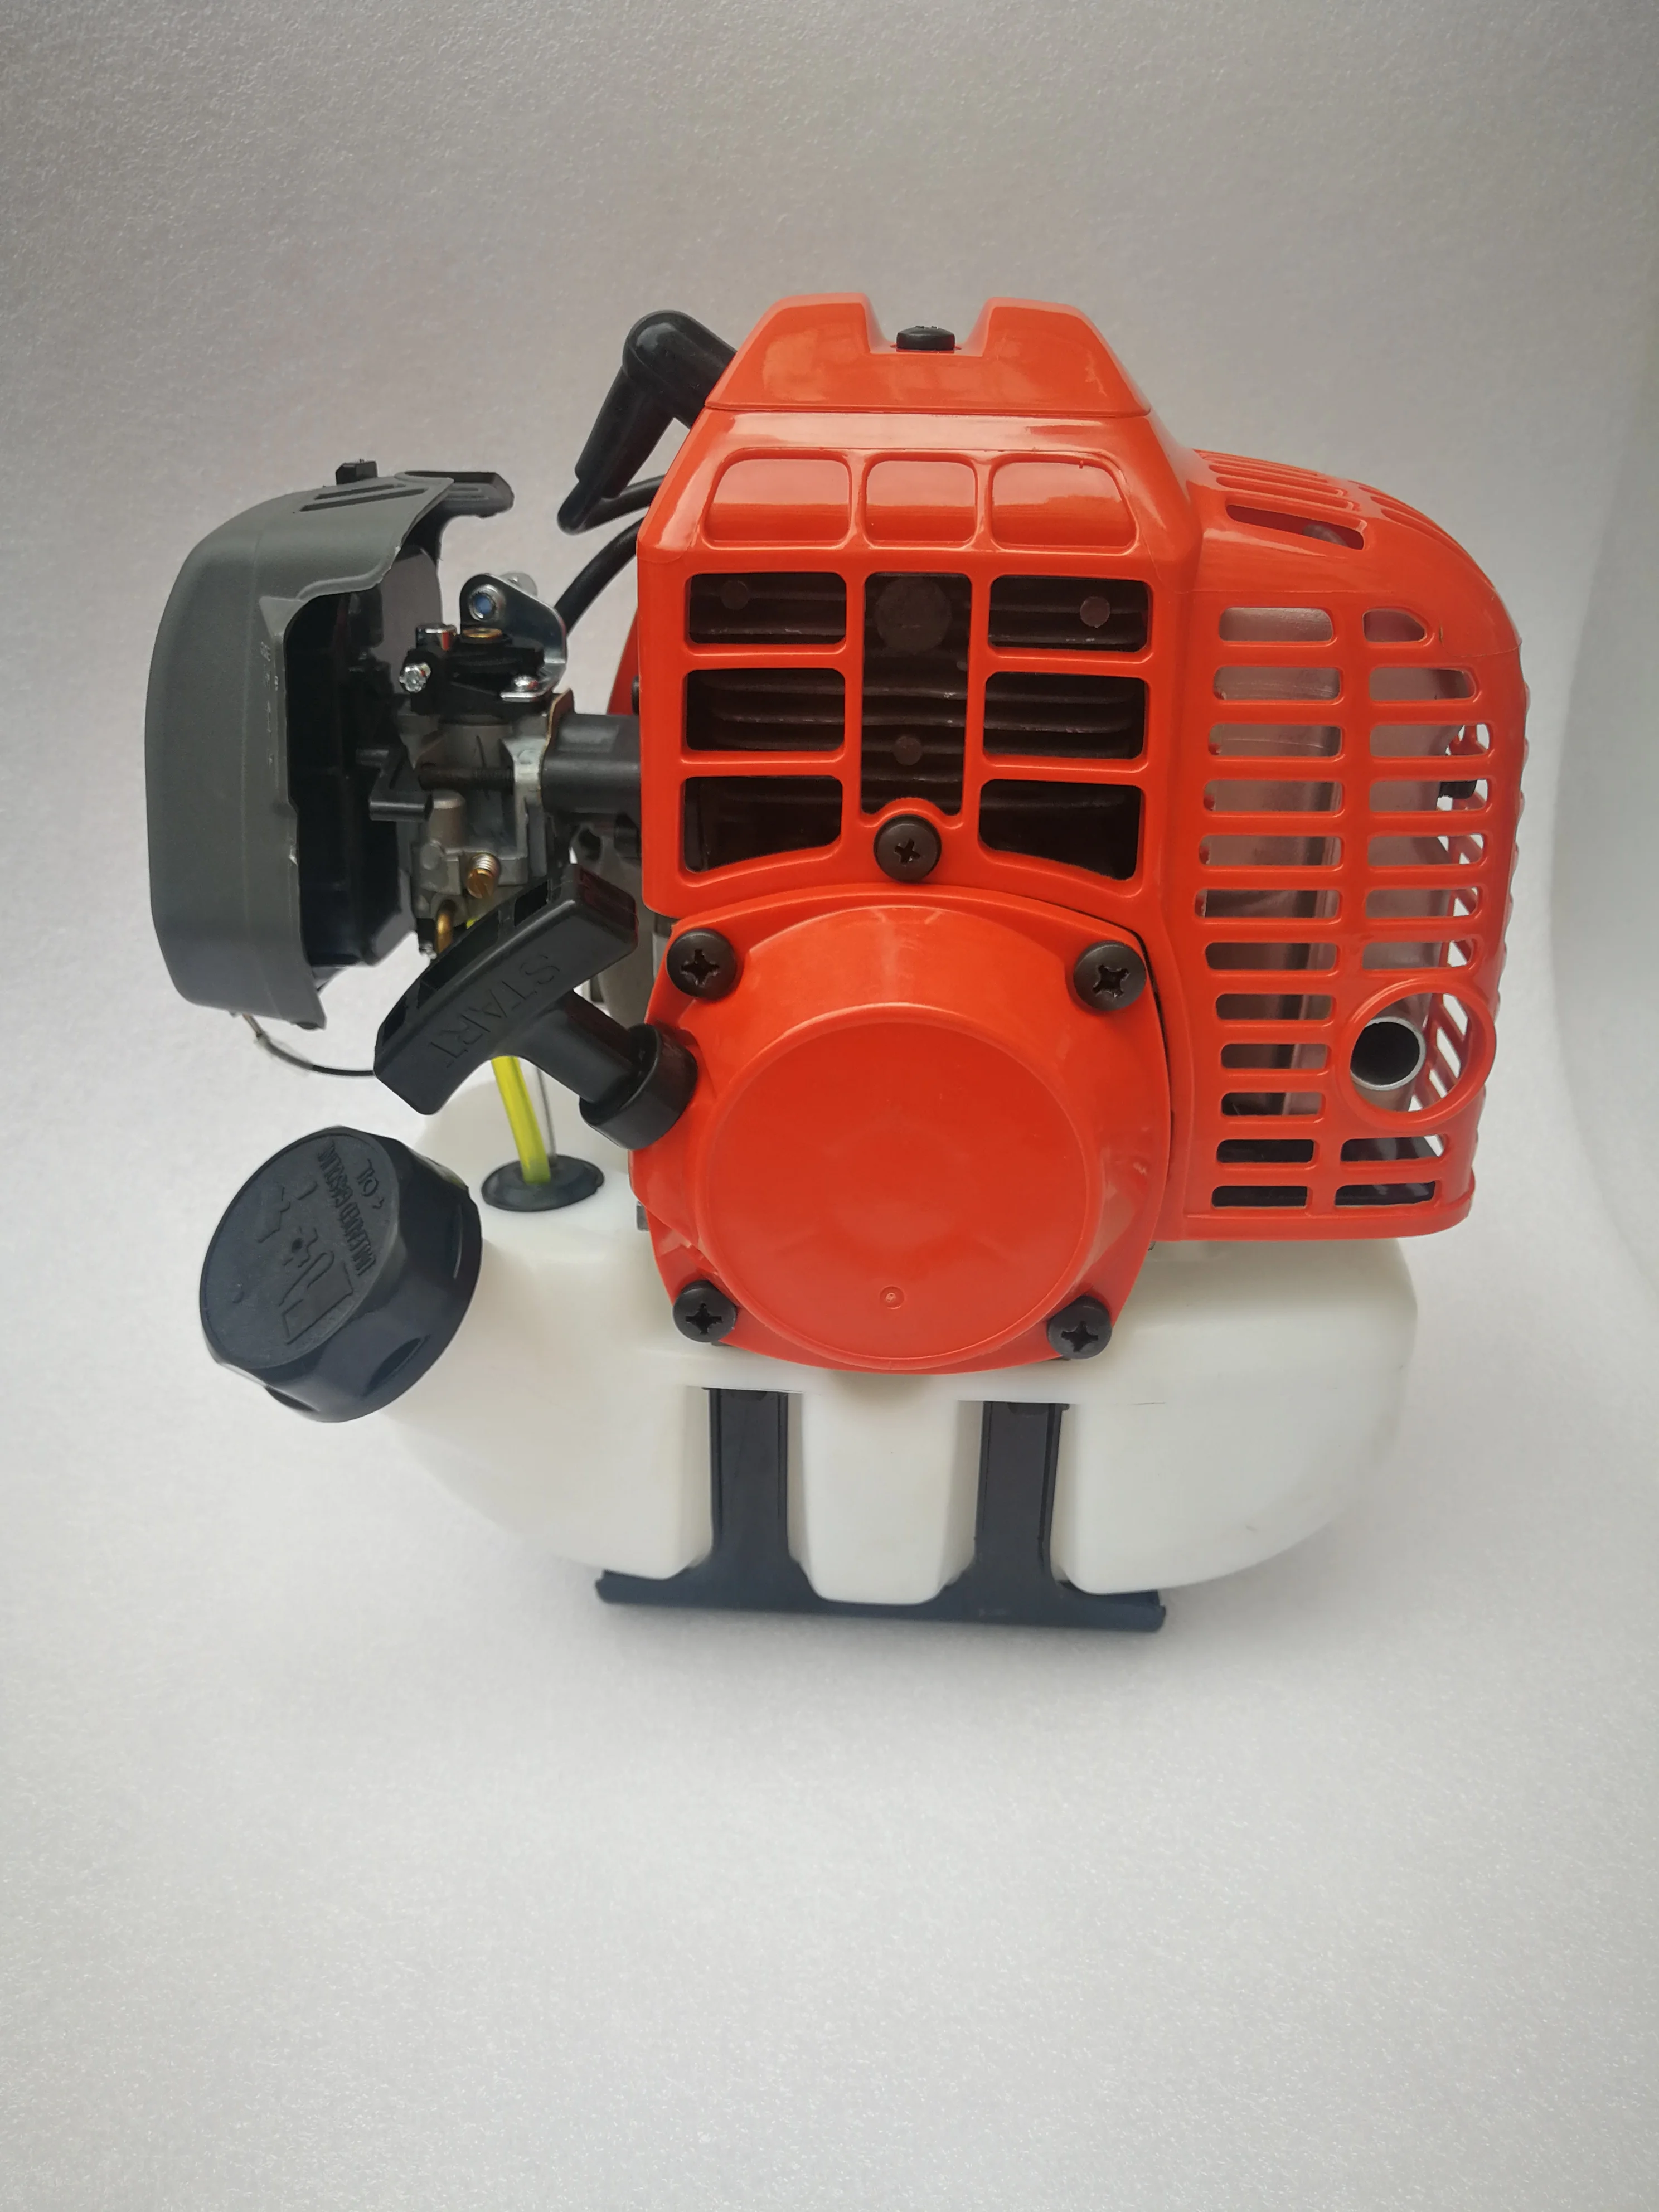 2T Power Engine G45L For Grass Trimmer Brush Cutter 443R,Bc4310,Gas Bc3410 Motor Powerful G4LS G4K cylinder piston sets for g45l g35 g4k bc4310 3410 bore 40mm 36mm zenoah replacement repair engine brush cutter earth drill motor